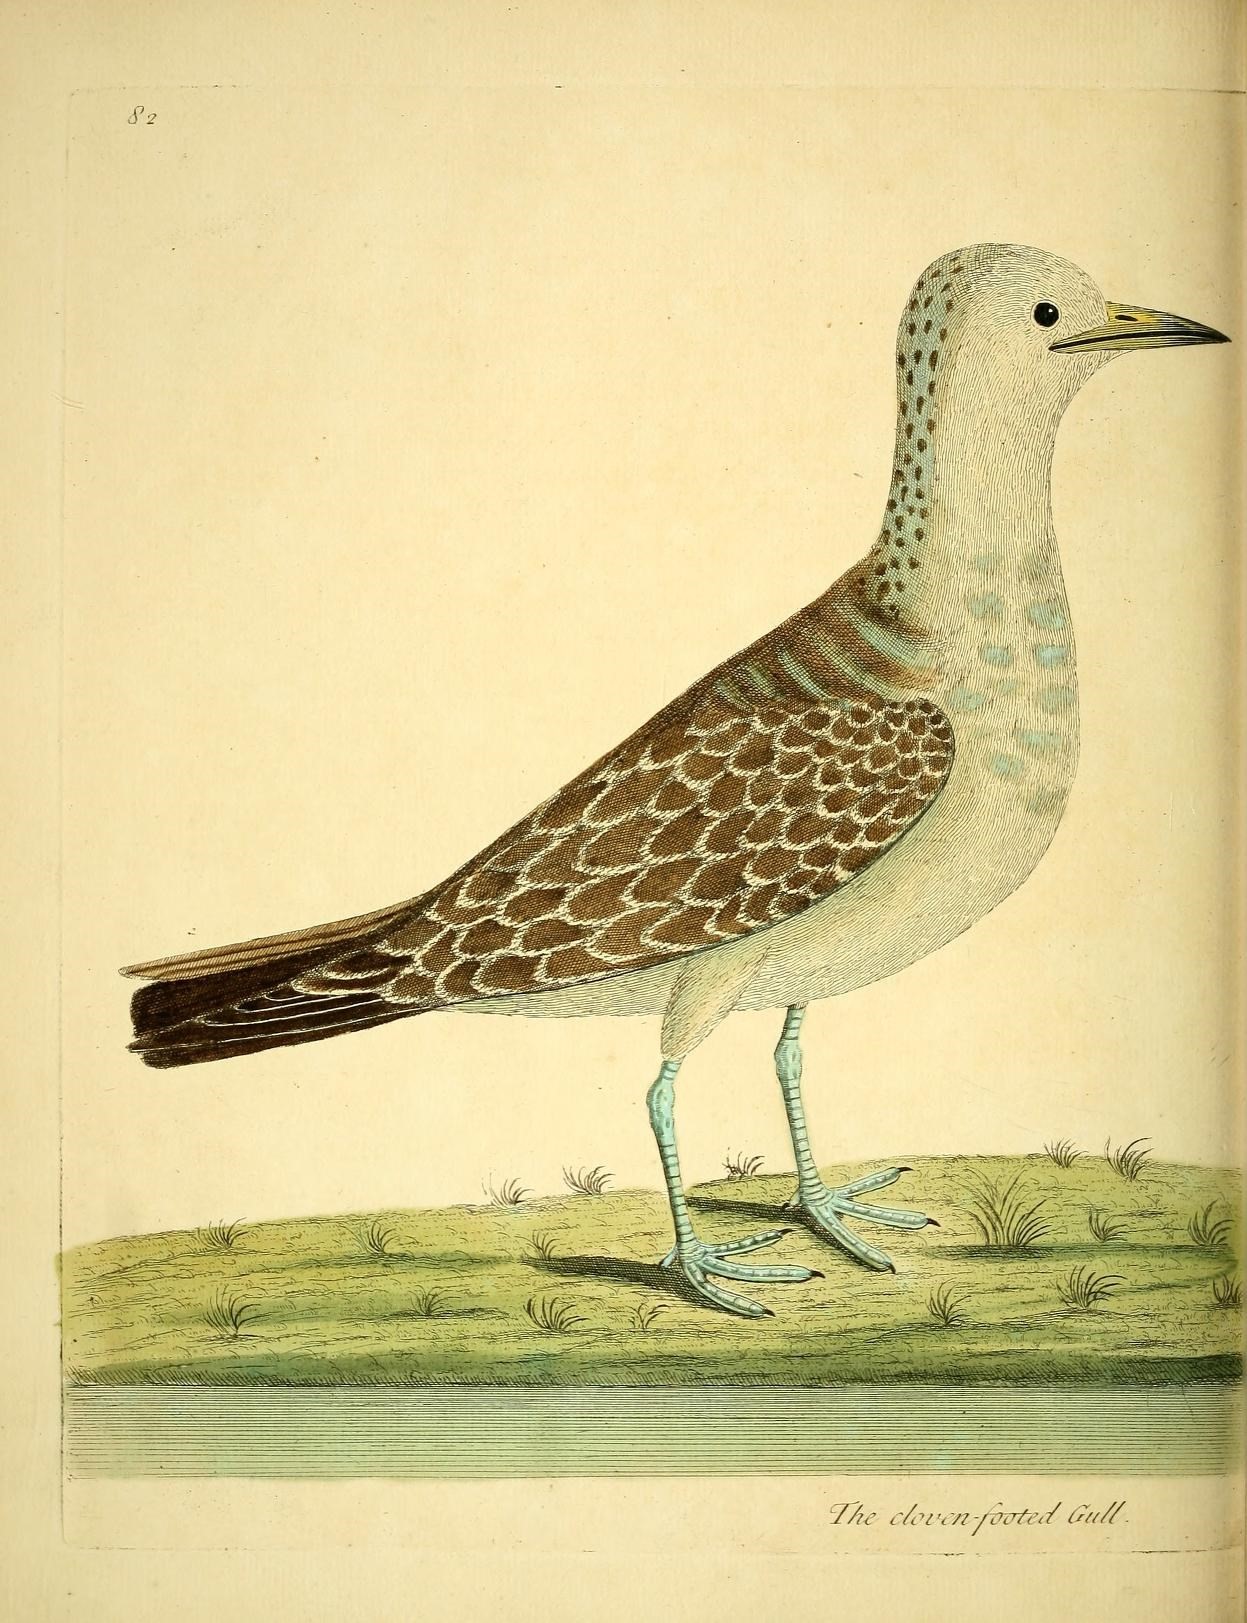 a drawing of a bird standing on some grass